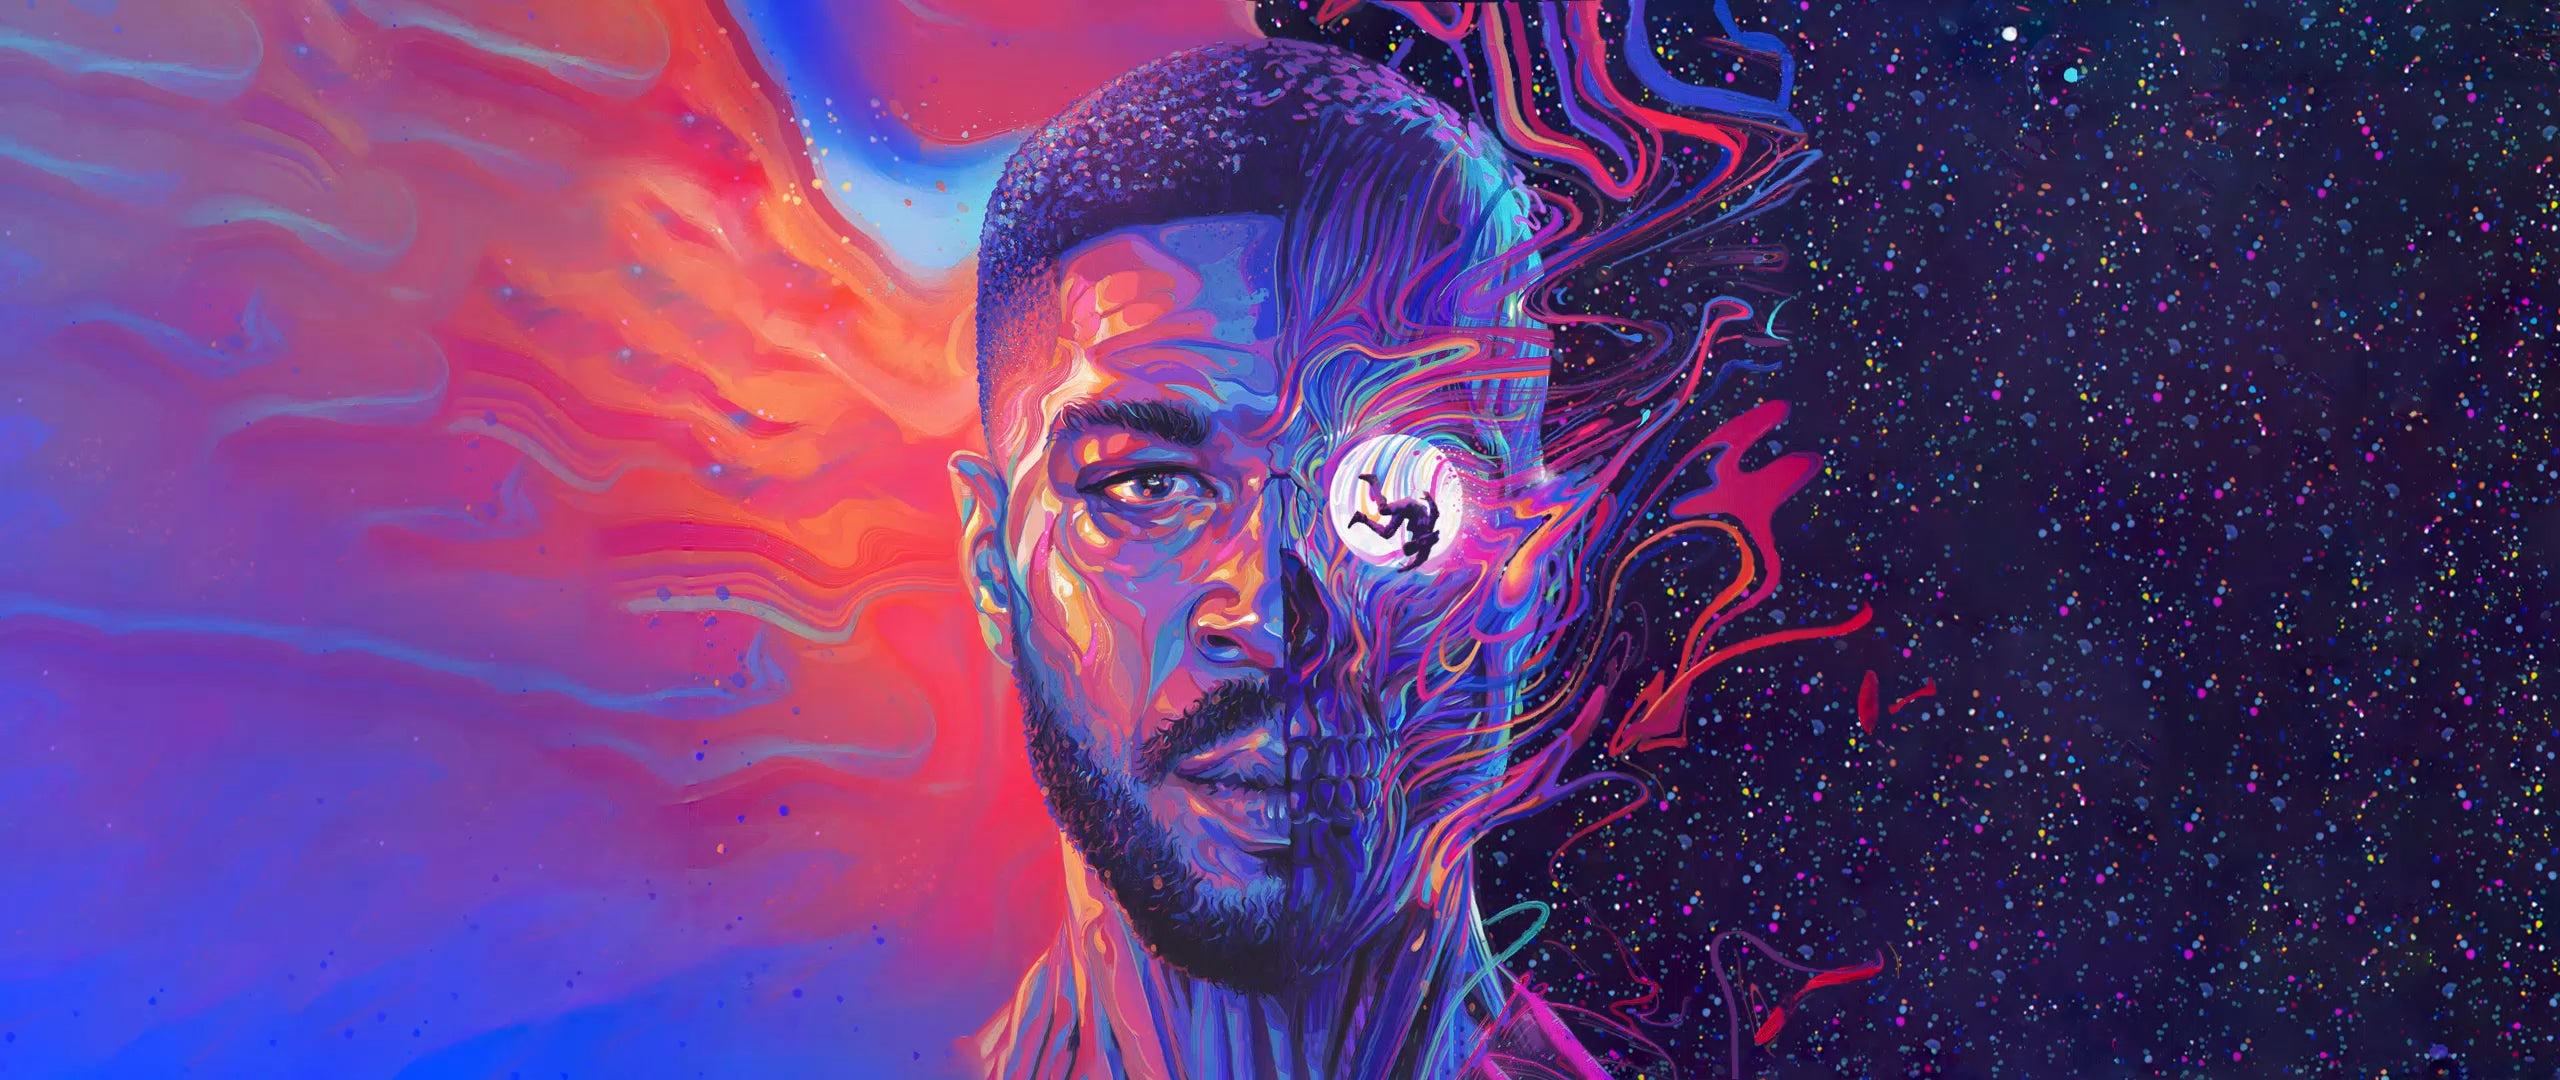 Man On The Moon 3 Wallpaper Engine link in the comments rKidCudi